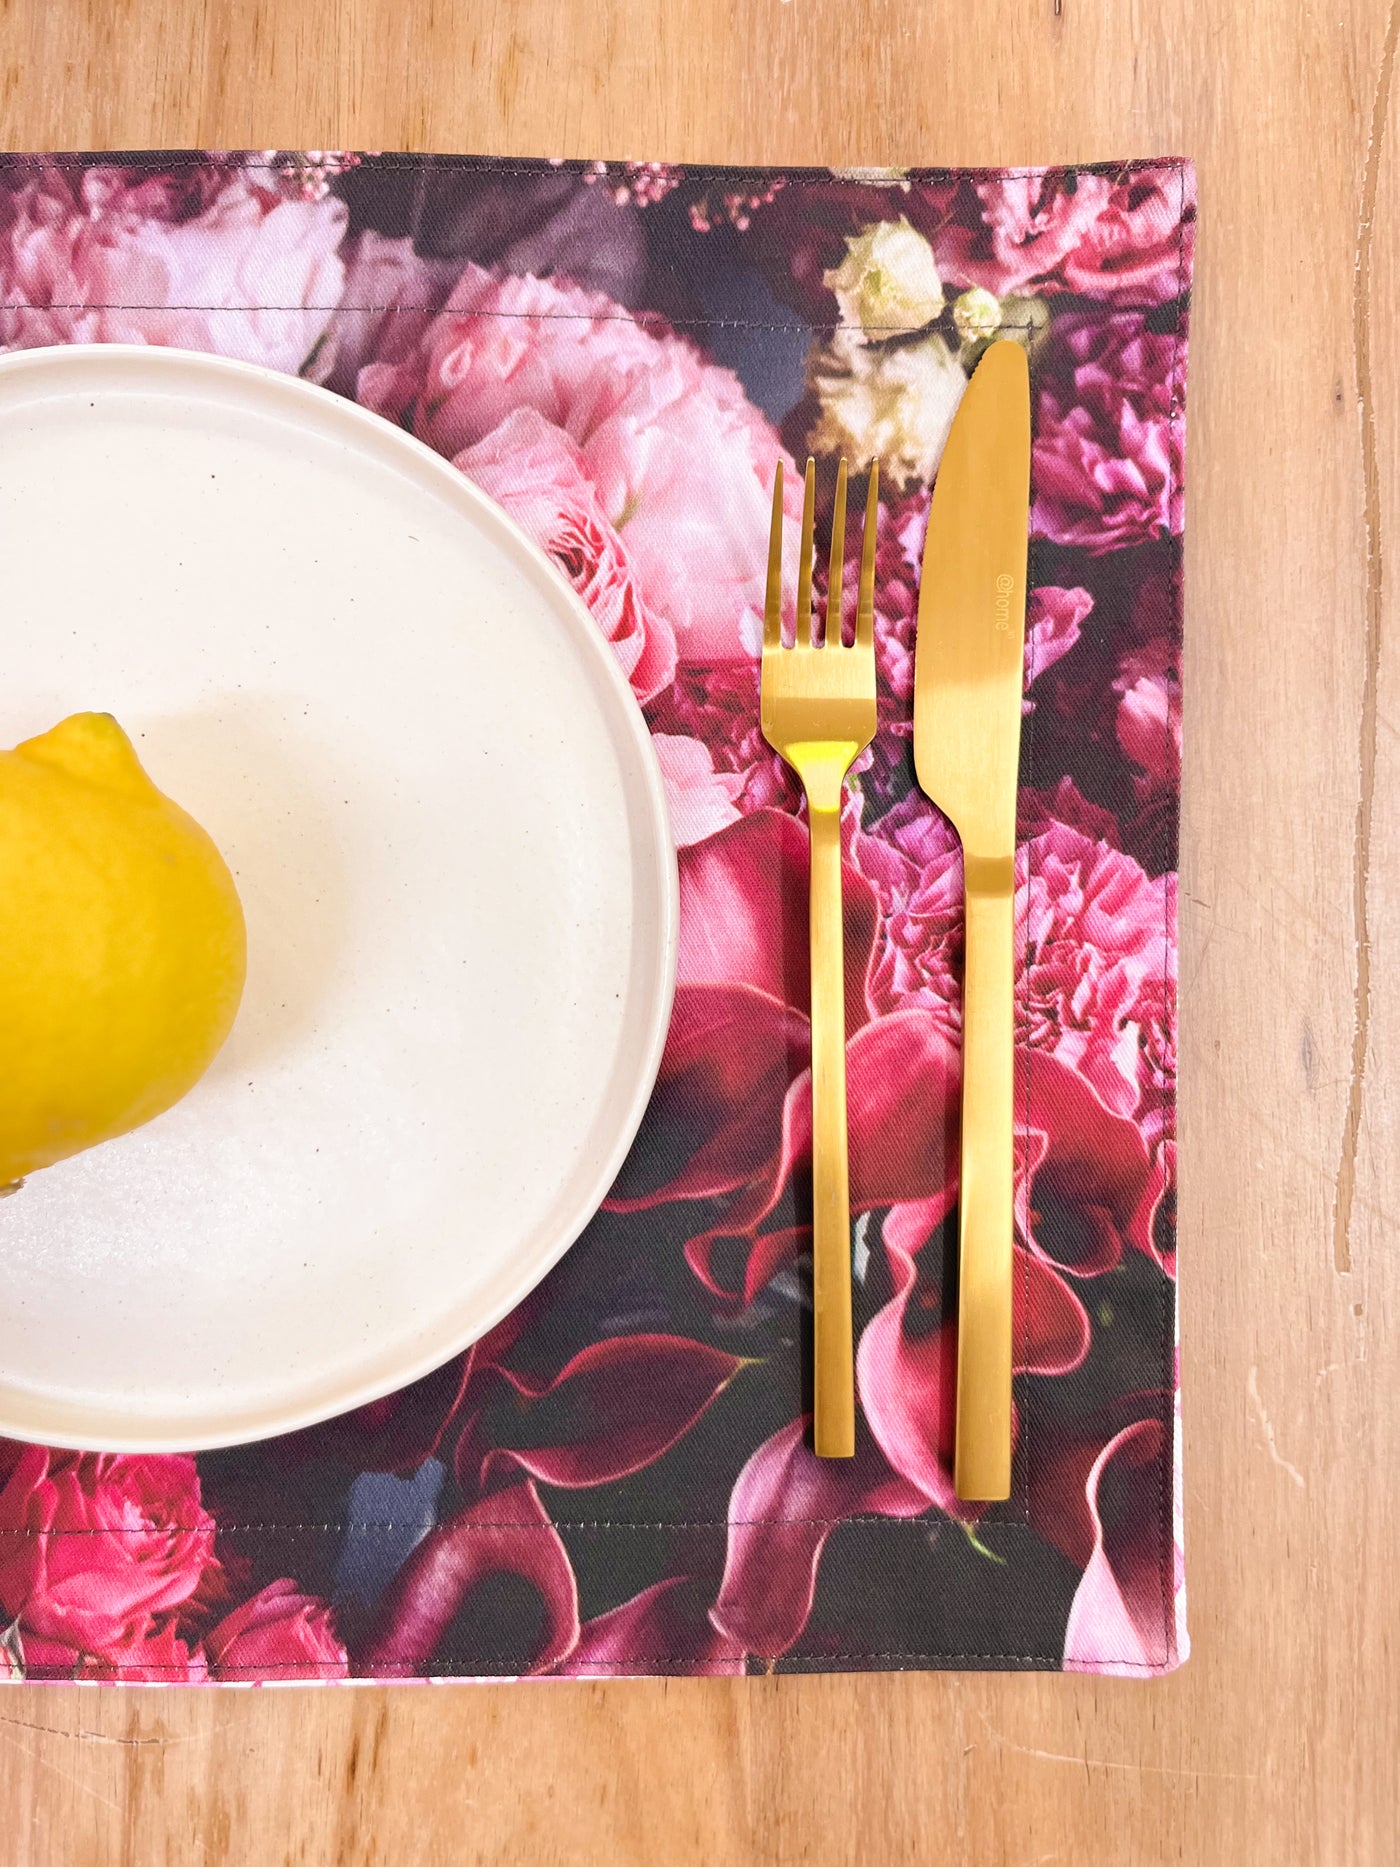 Lemon on White Crockery with Golden Utensils on Floral Placemat